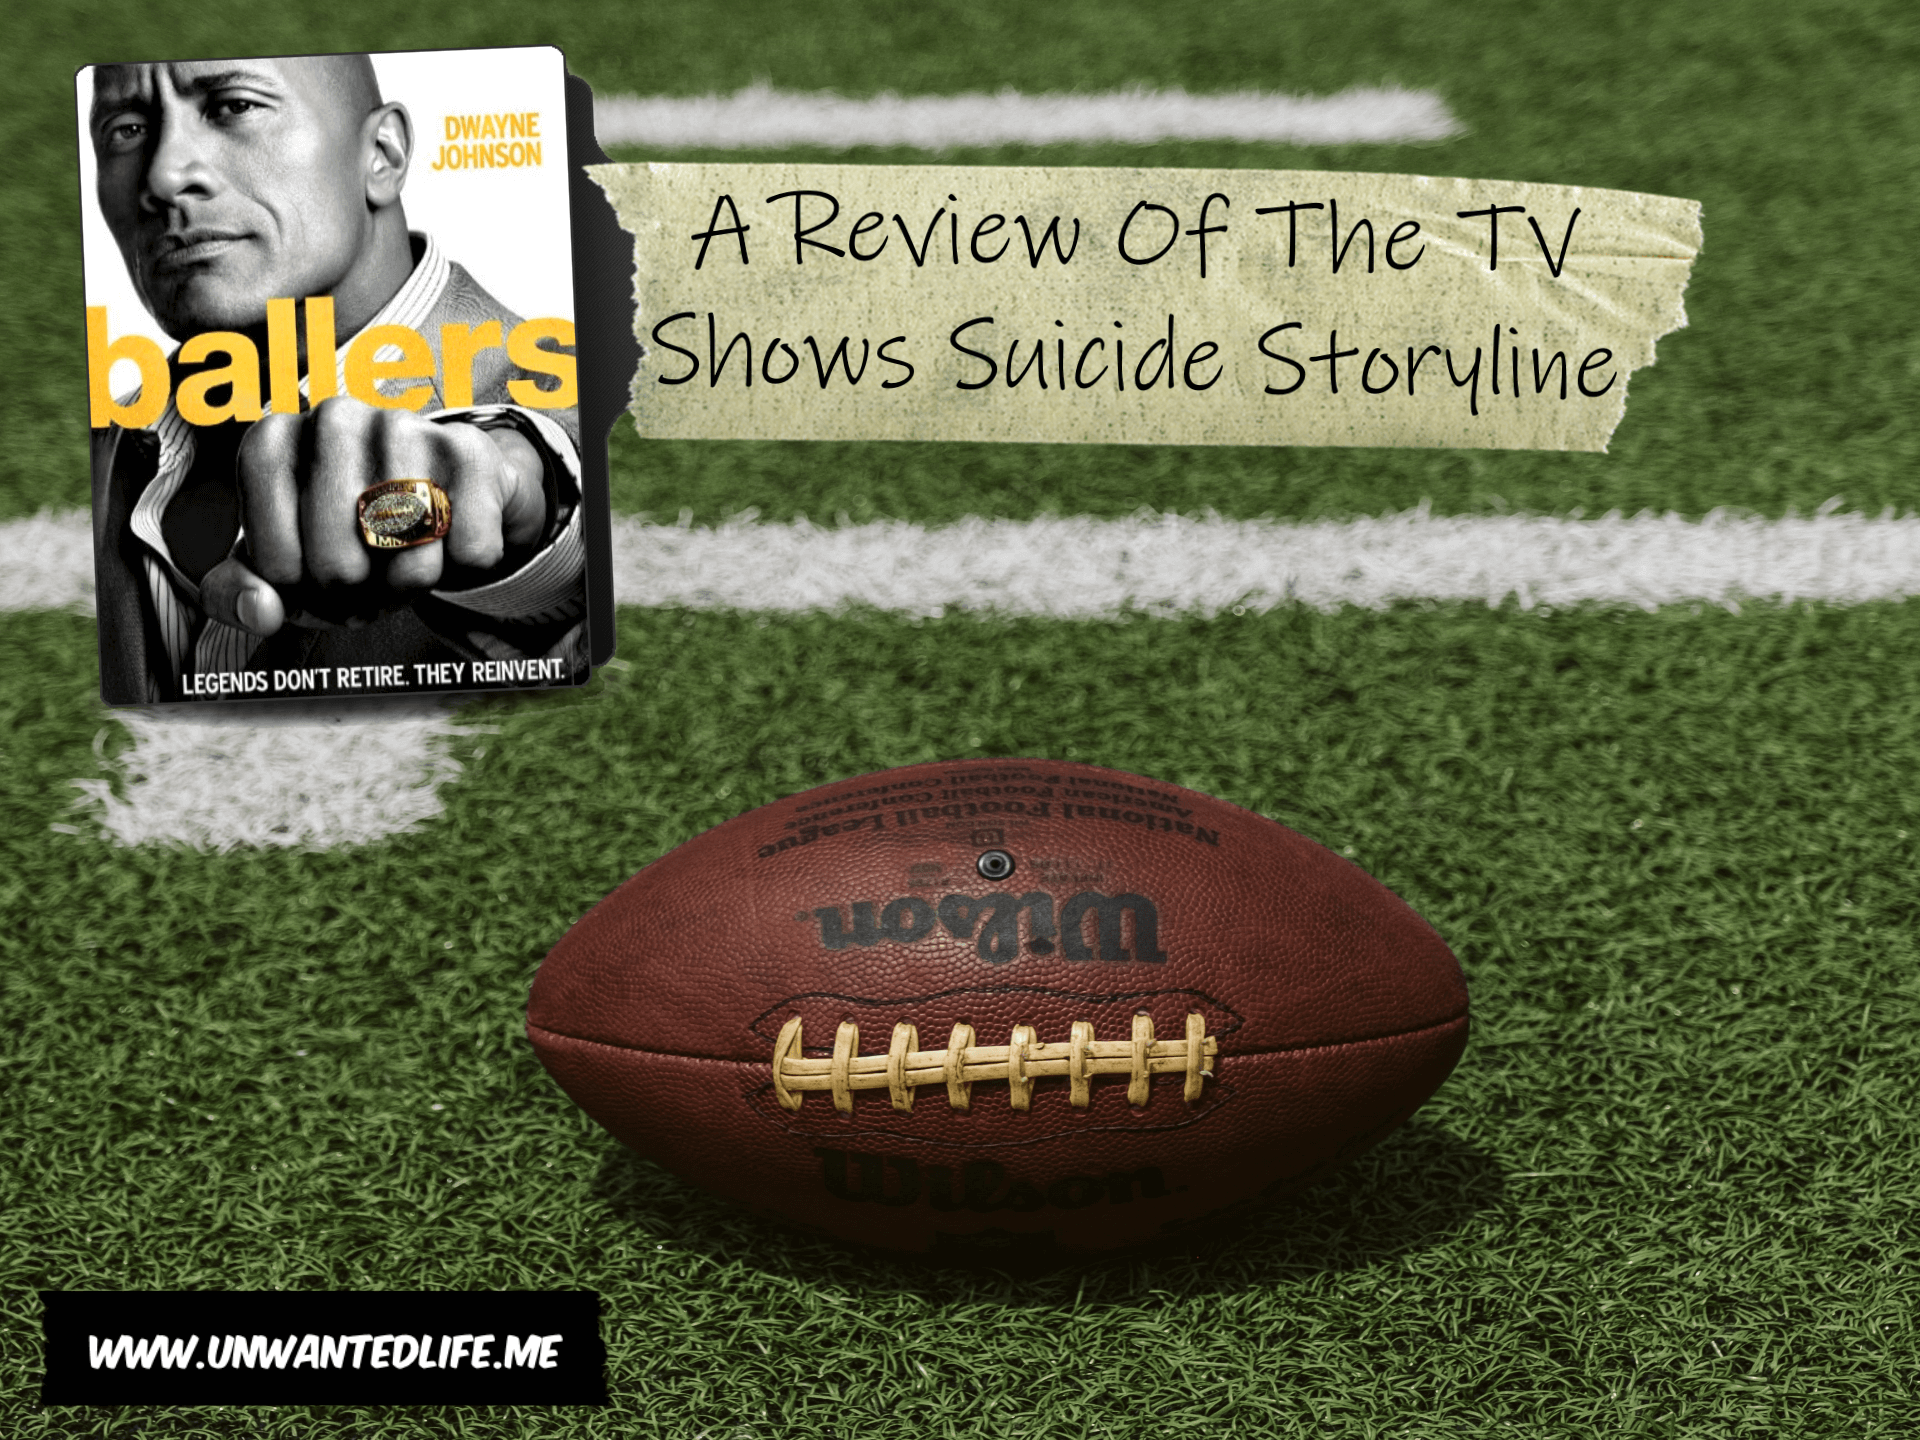 A photo of an American Football of a football field with an image from the TV show Ballers with the article title - Ballers: A Review Of The TV Shows Suicide Storyline - overlaying that Ballers image